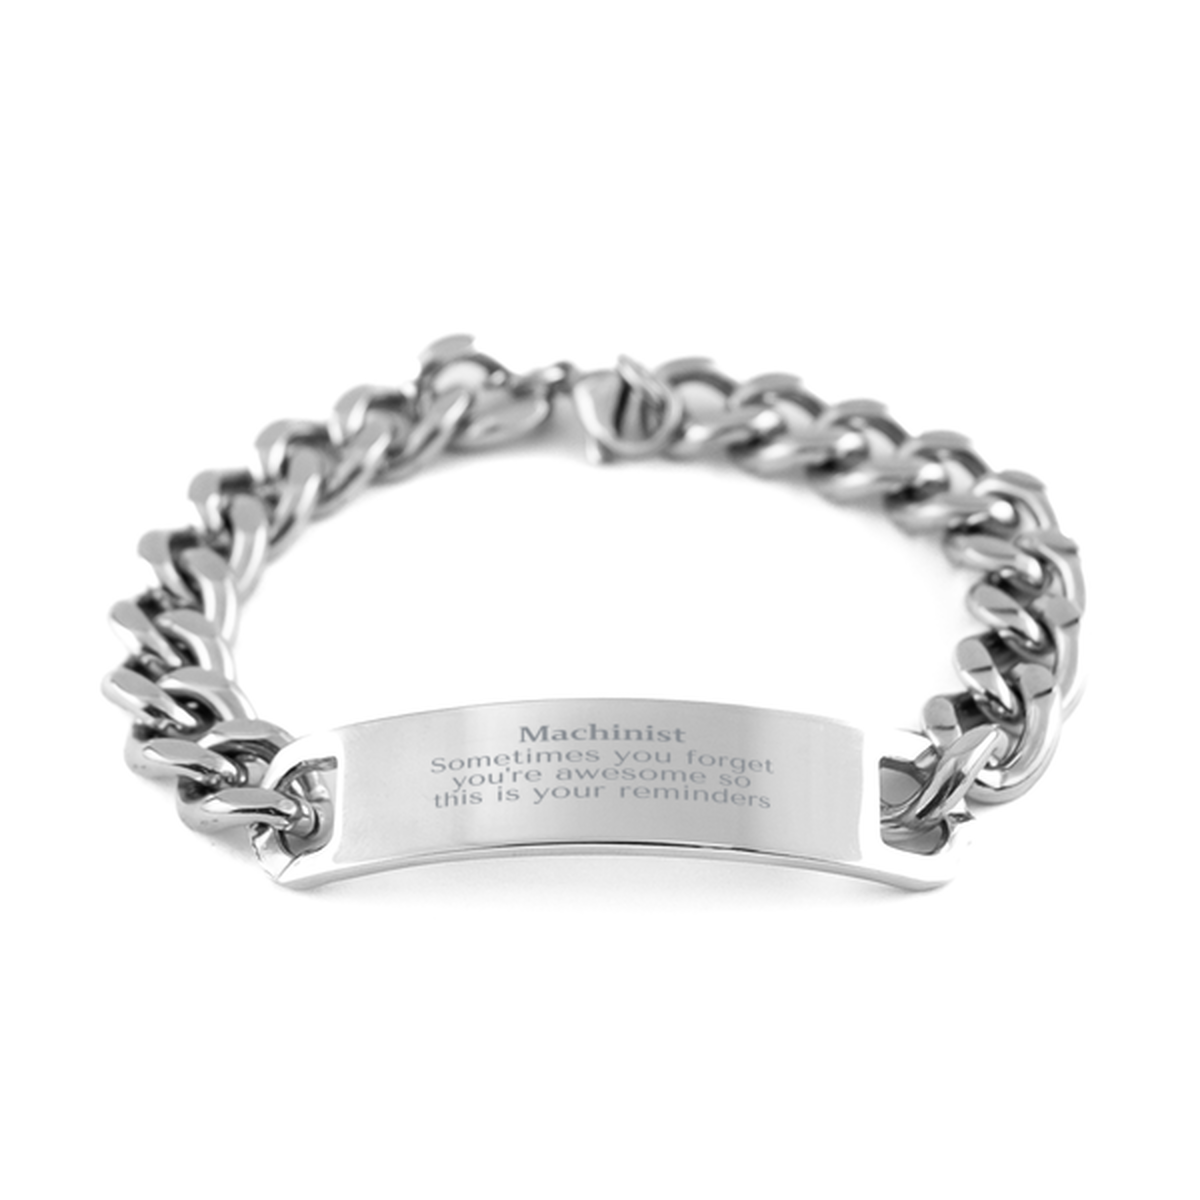 Sentimental Machinist Cuban Chain Stainless Steel Bracelet, Machinist Sometimes you forget you're awesome so this is your reminders, Graduation Christmas Birthday Gifts for Machinist, Men, Women, Coworkers